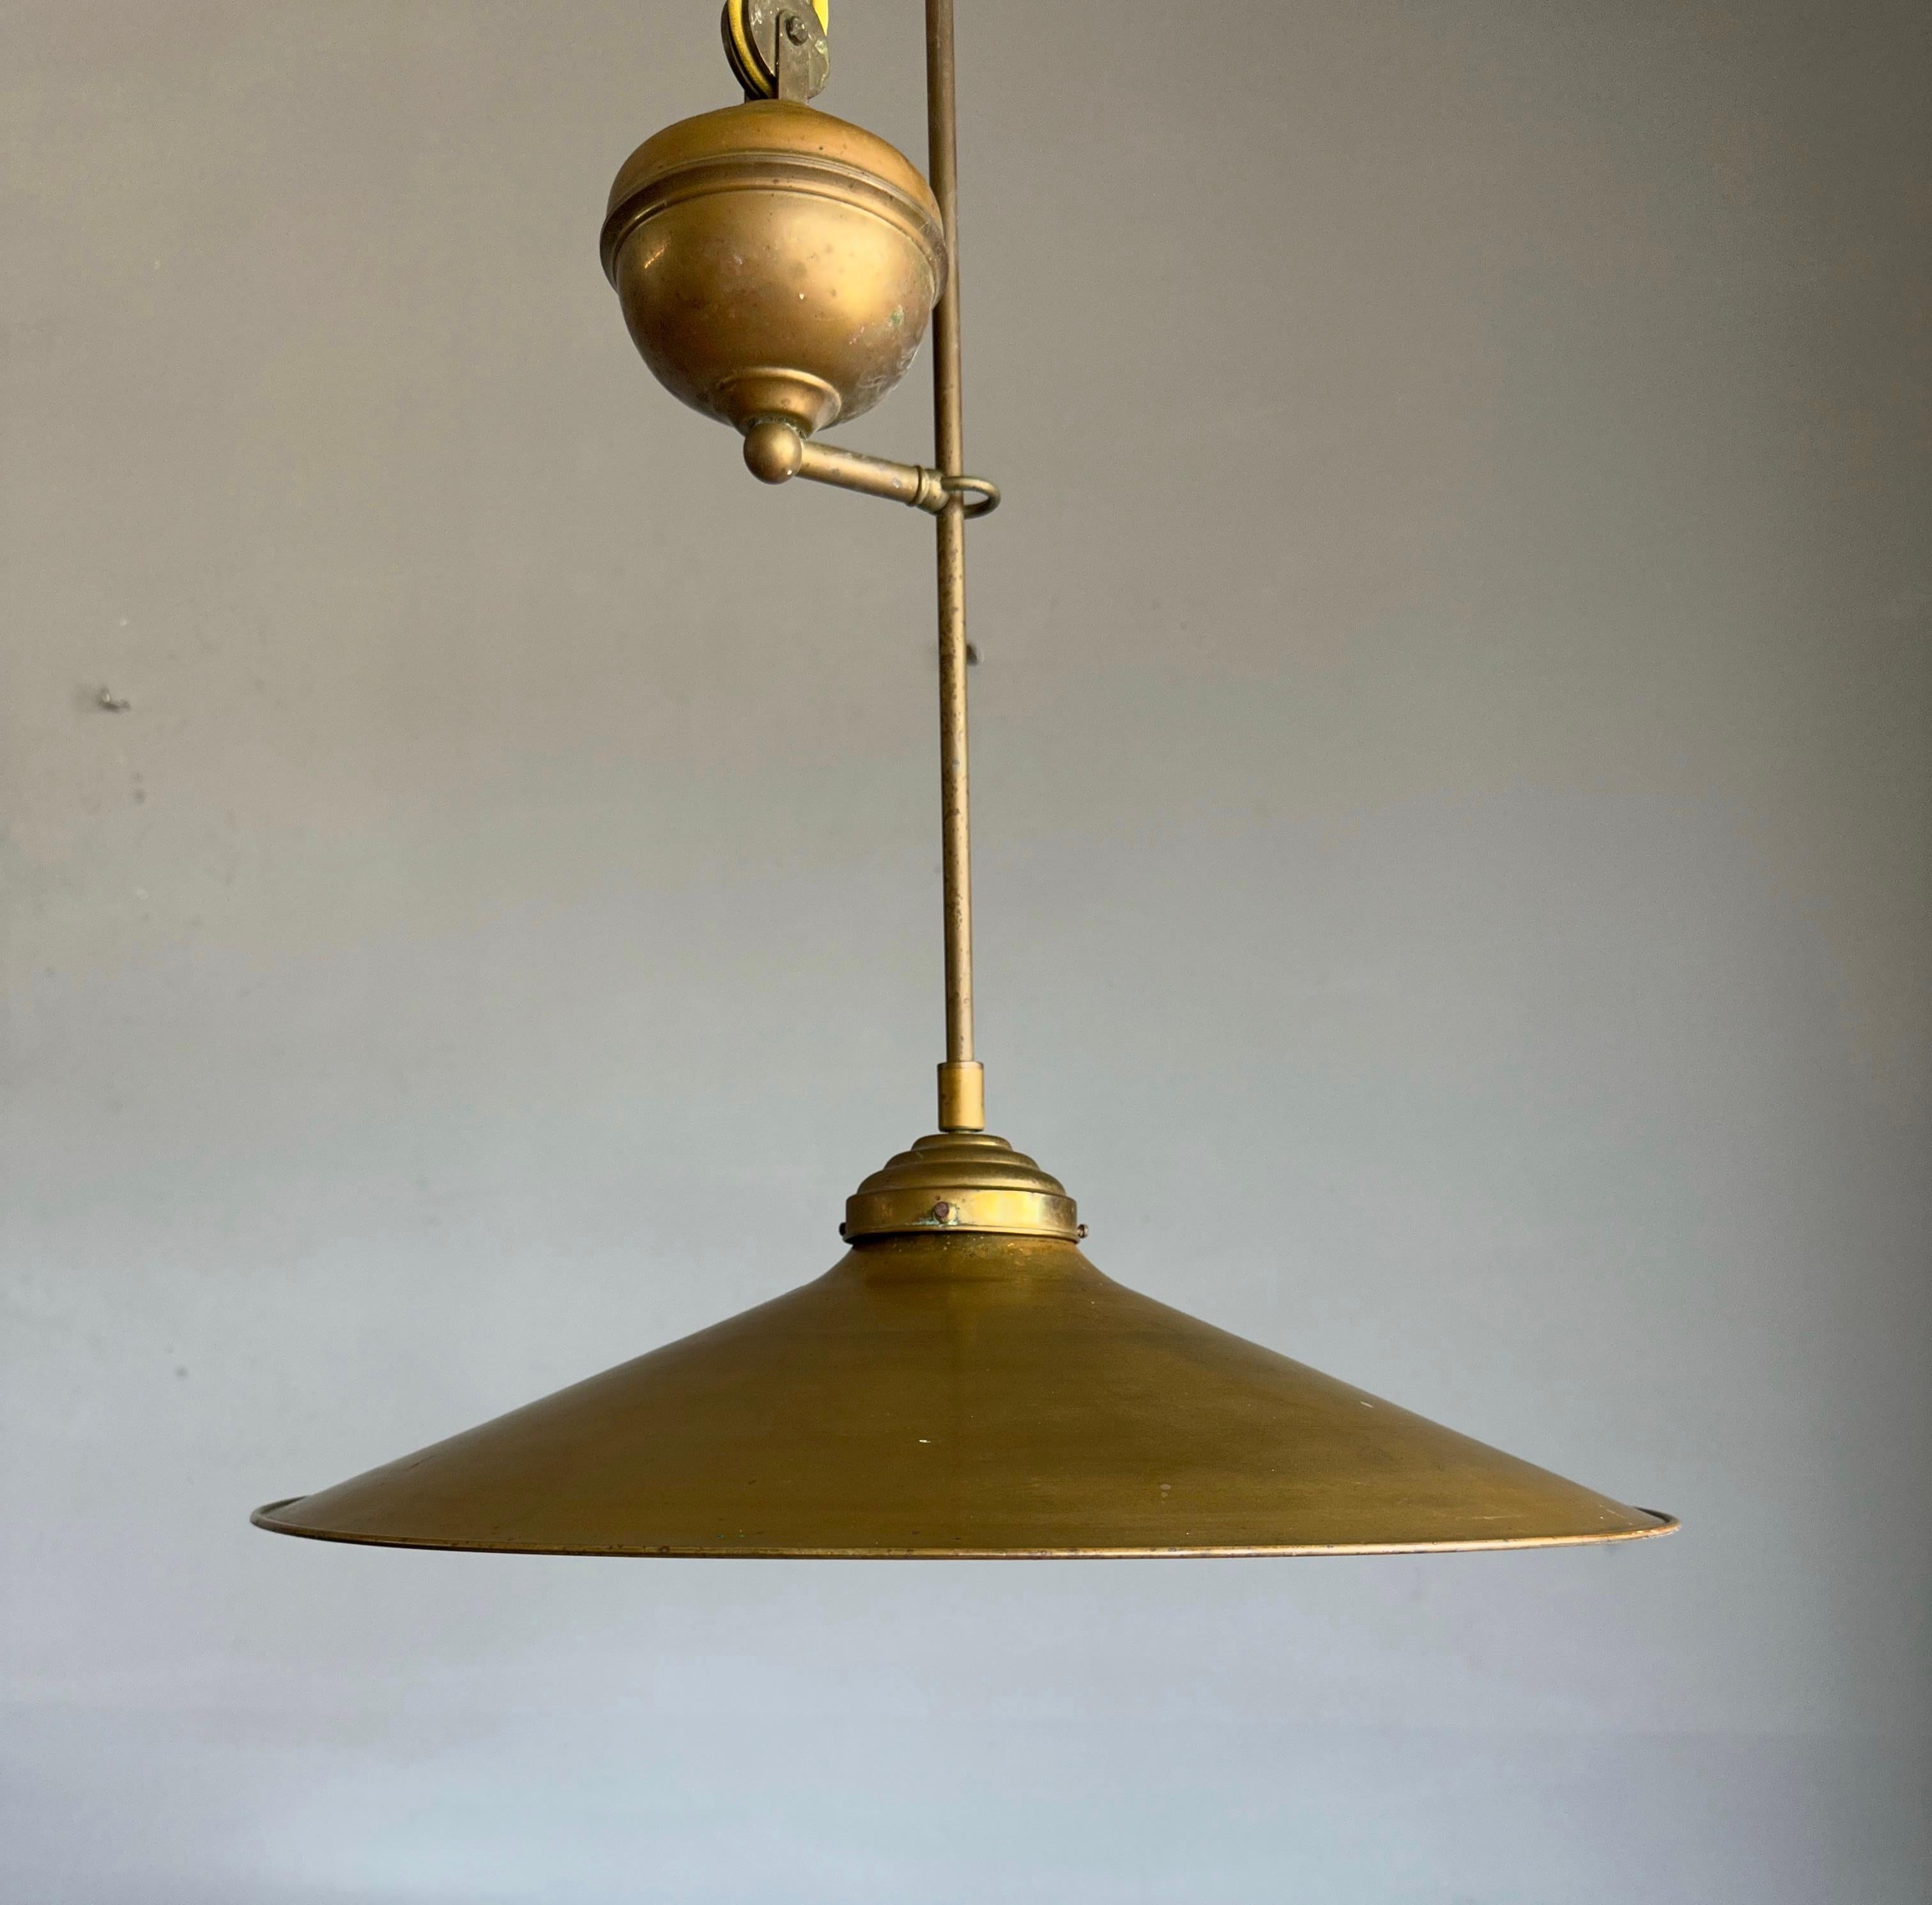 Patinated Rare and Handcrafted Mid-Century Modern Brass and Bronze Pendant, Ceiling Light For Sale